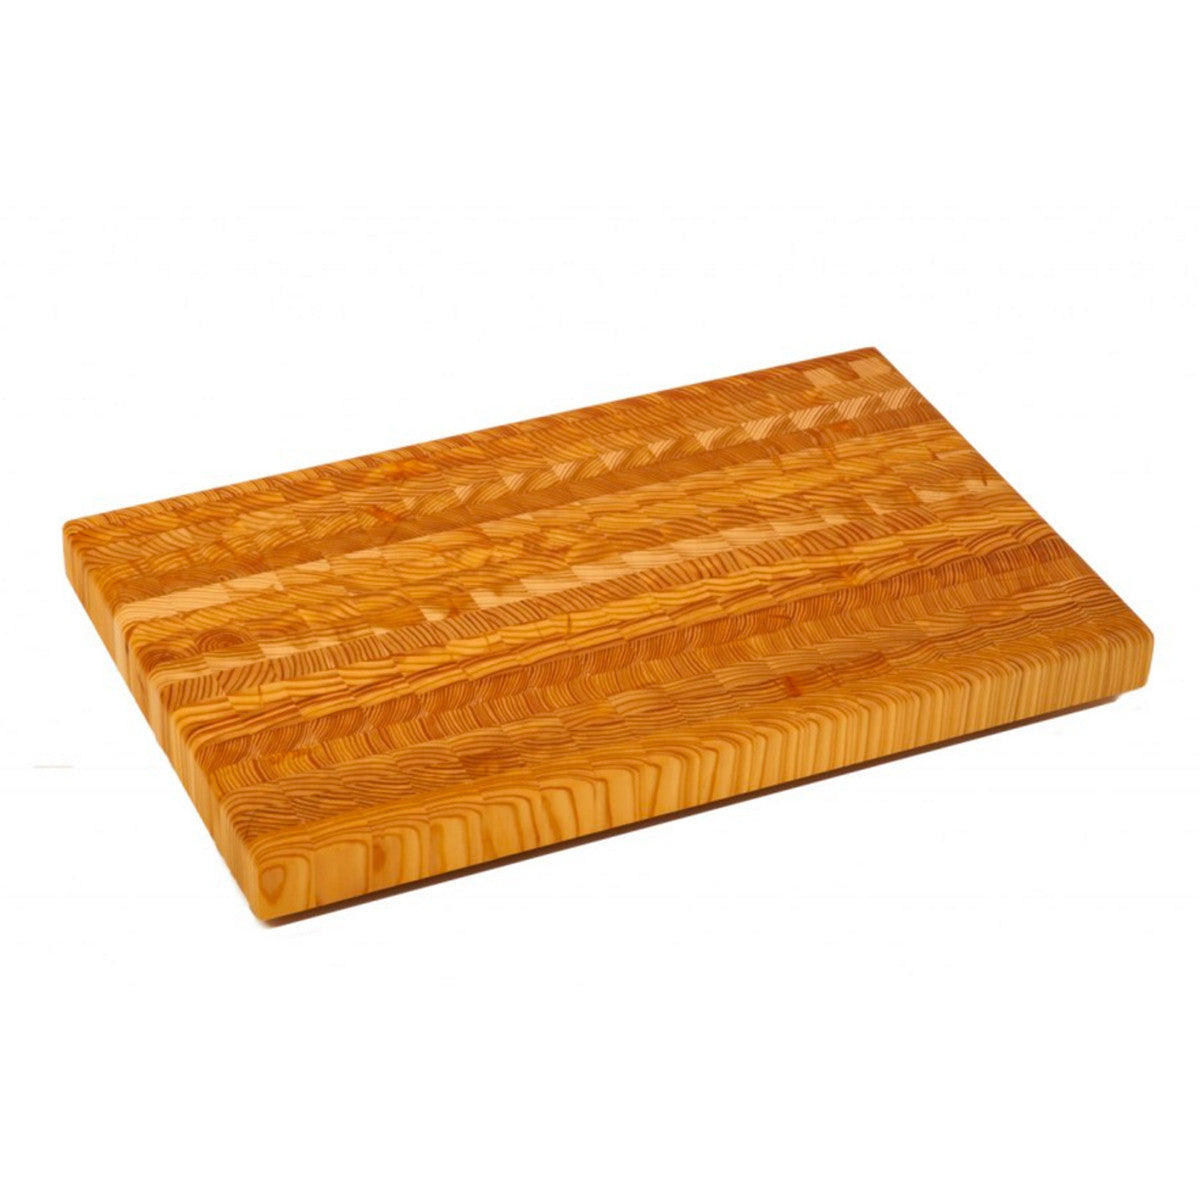 Larch Wood large cutting board is a beautifully crafted piece ideal for serving and preparation.